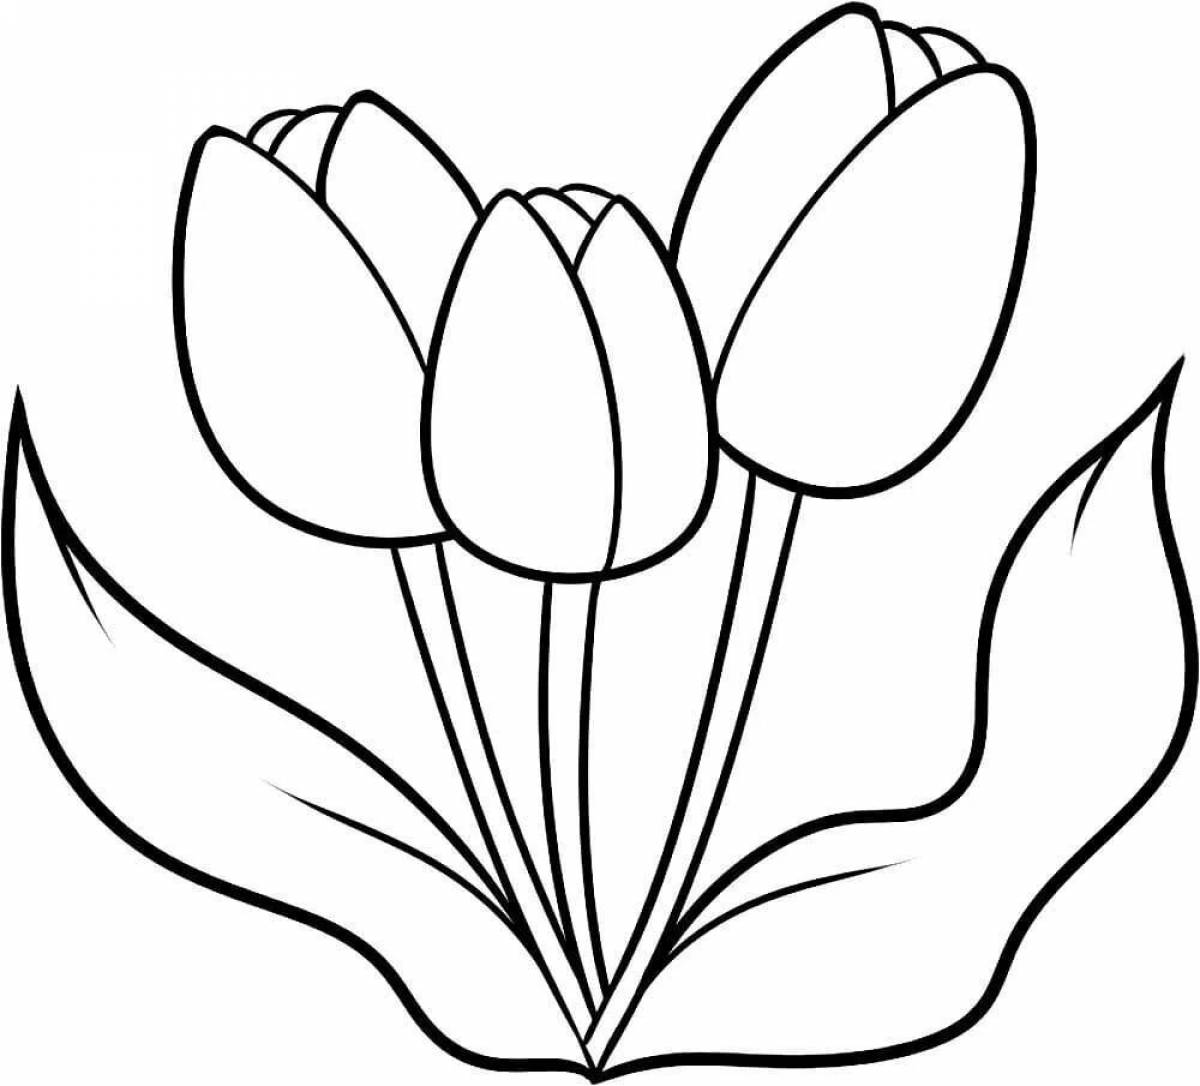 Sweet tulips coloring for children 5-6 years old